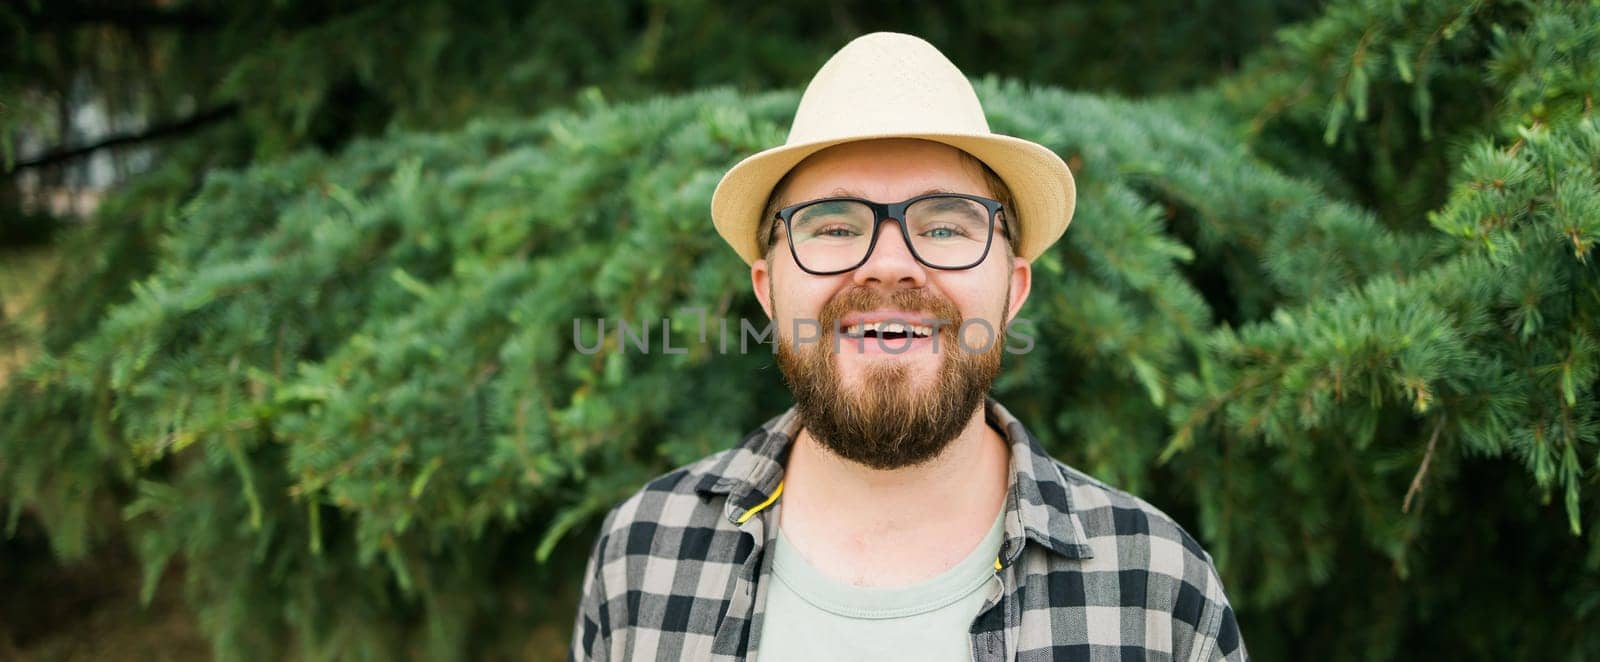 Banner laughing millennial man wearing hat over green tree background copy space and empty place for advertising - emotion and vacation travel holidays concept by Satura86